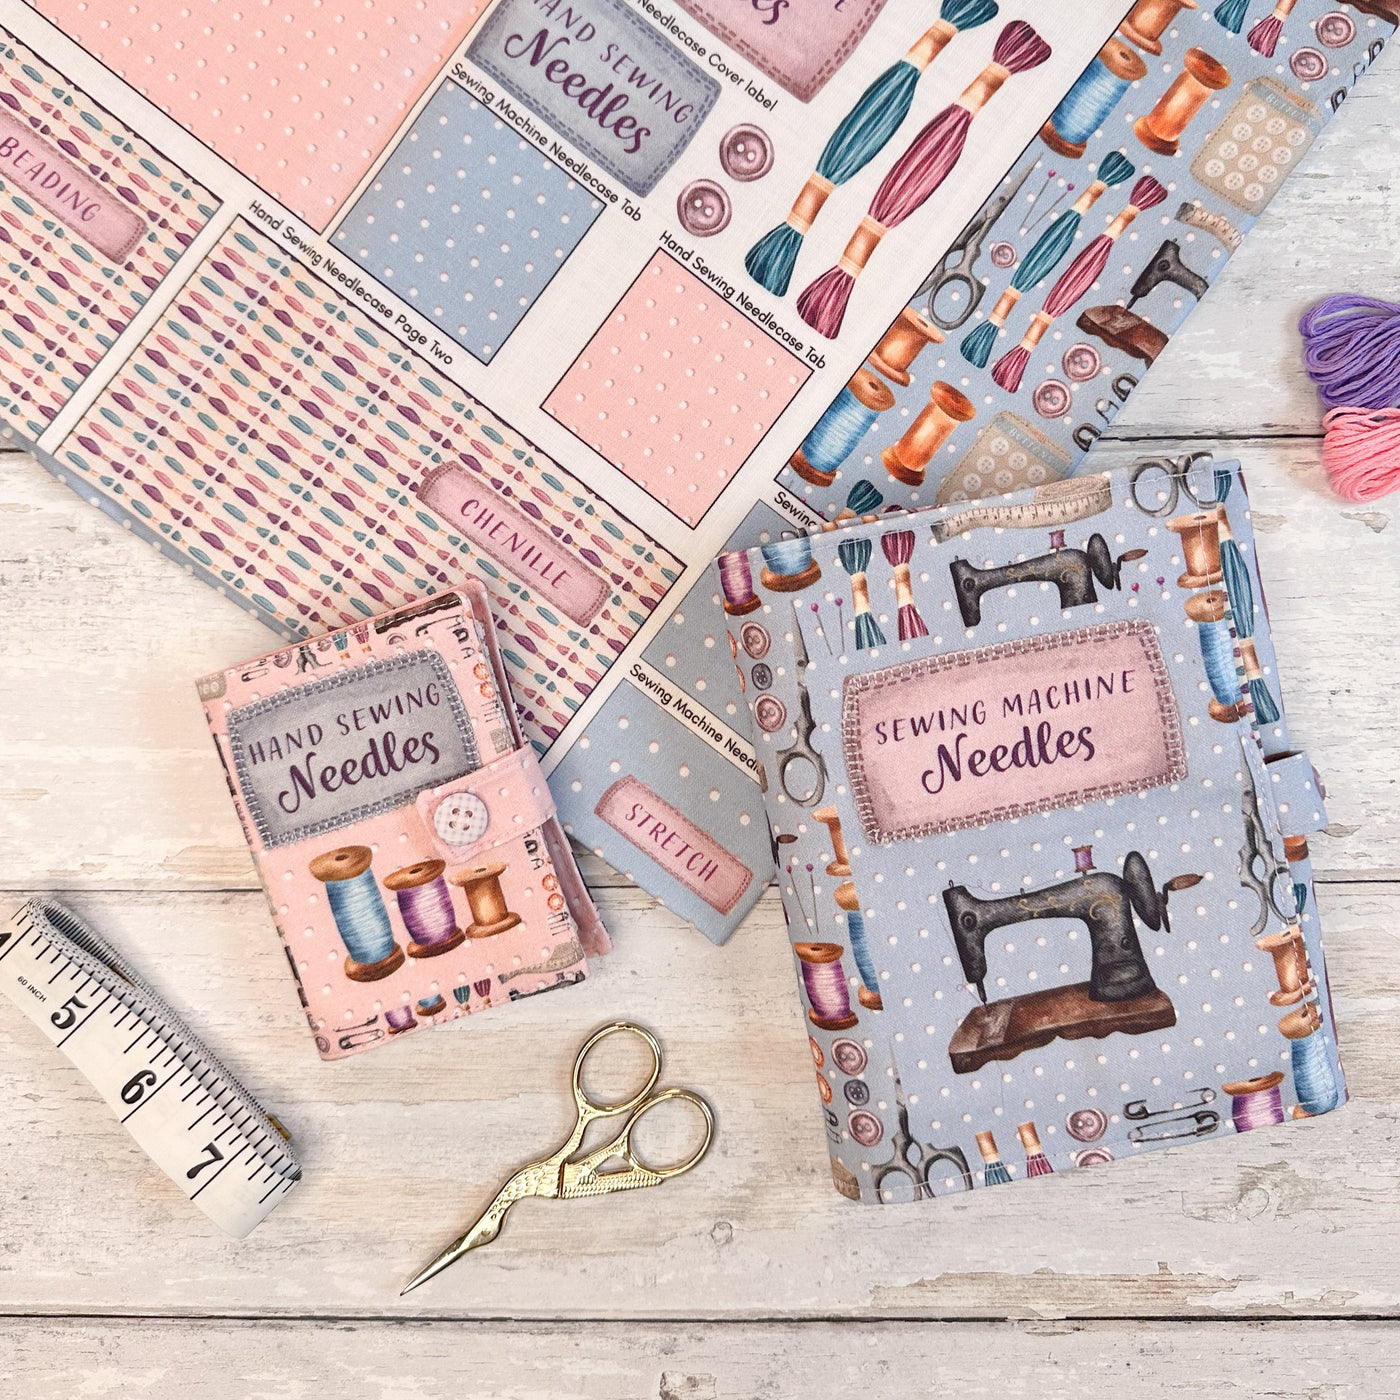 Sewing machine and hand sewing needle case